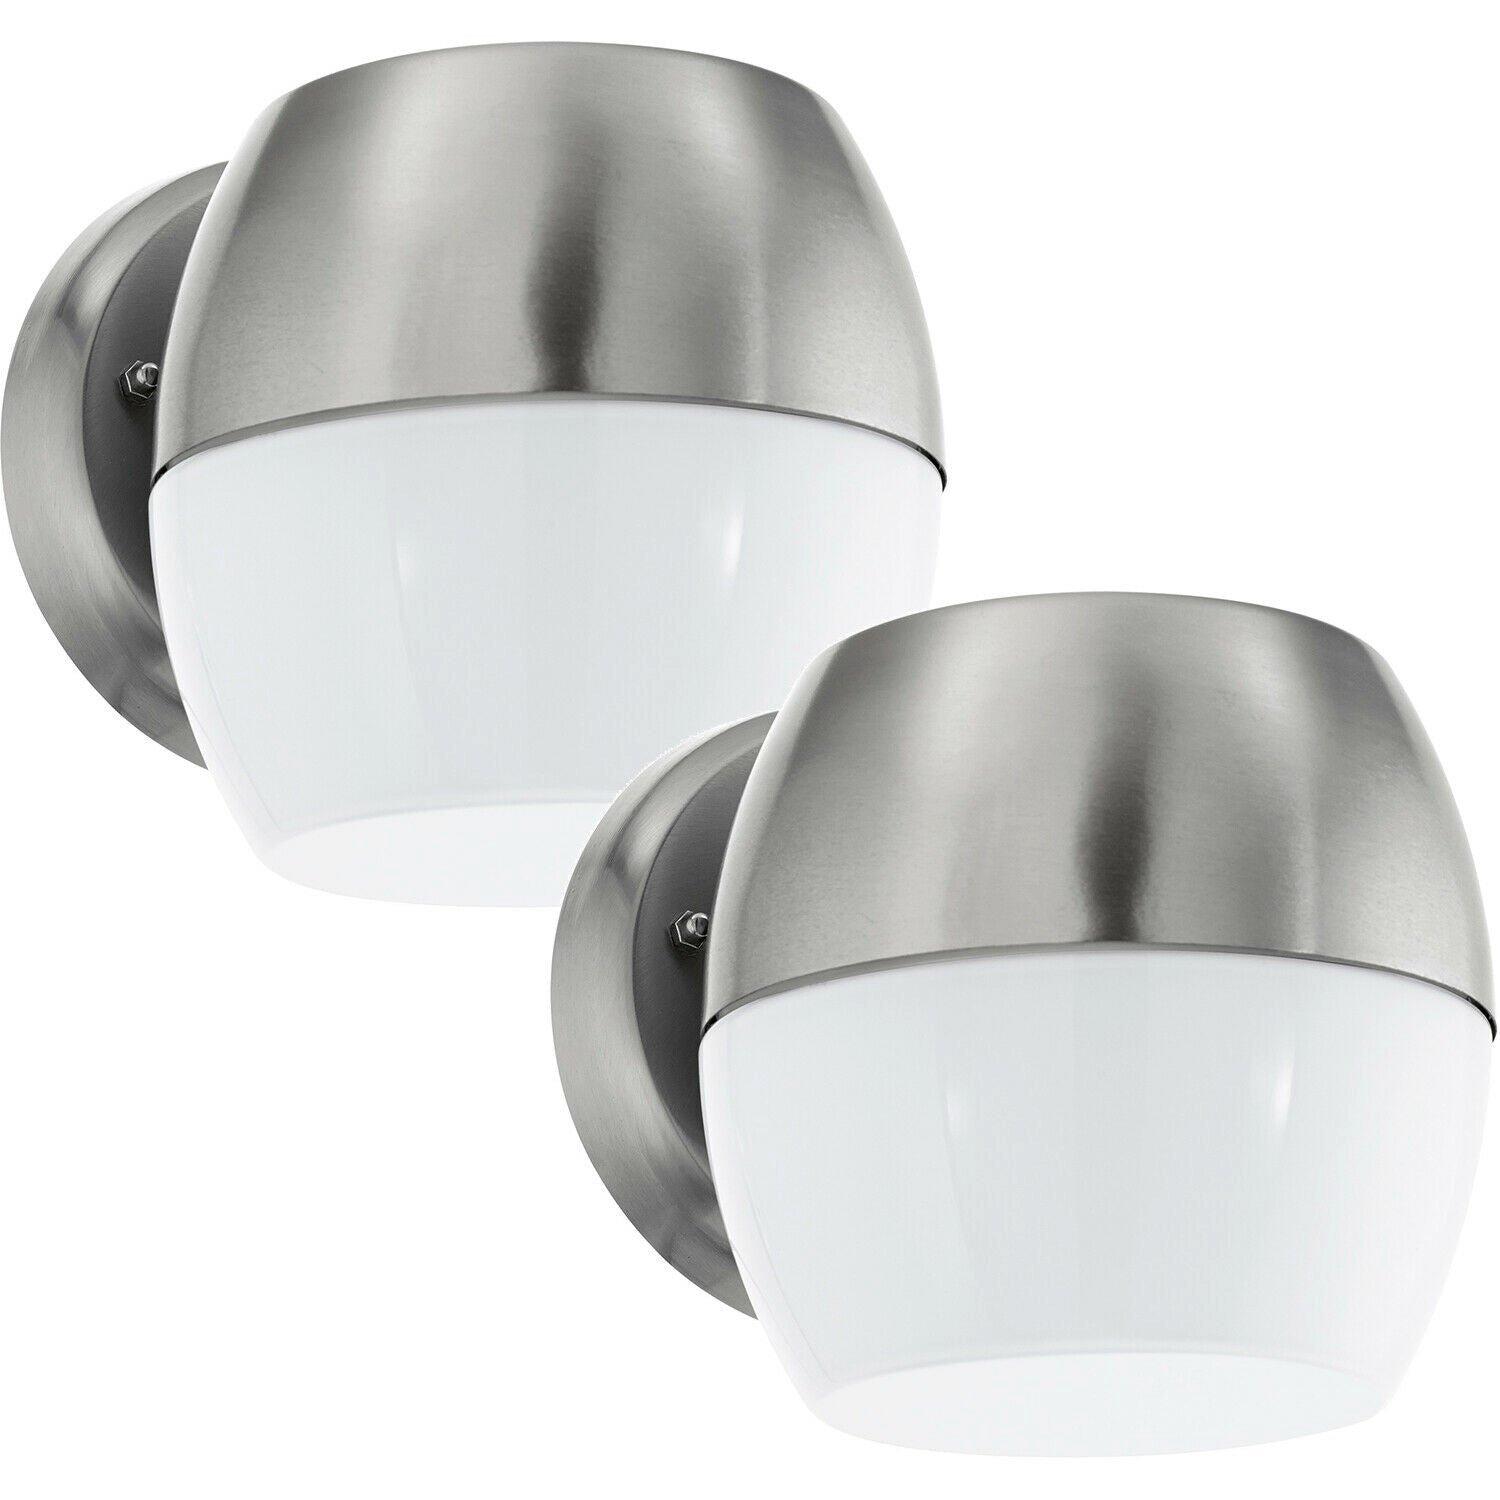 2 PACK IP44 Outdoor Wall Light Stainless Steel 11W Built in LED Porch Lamp